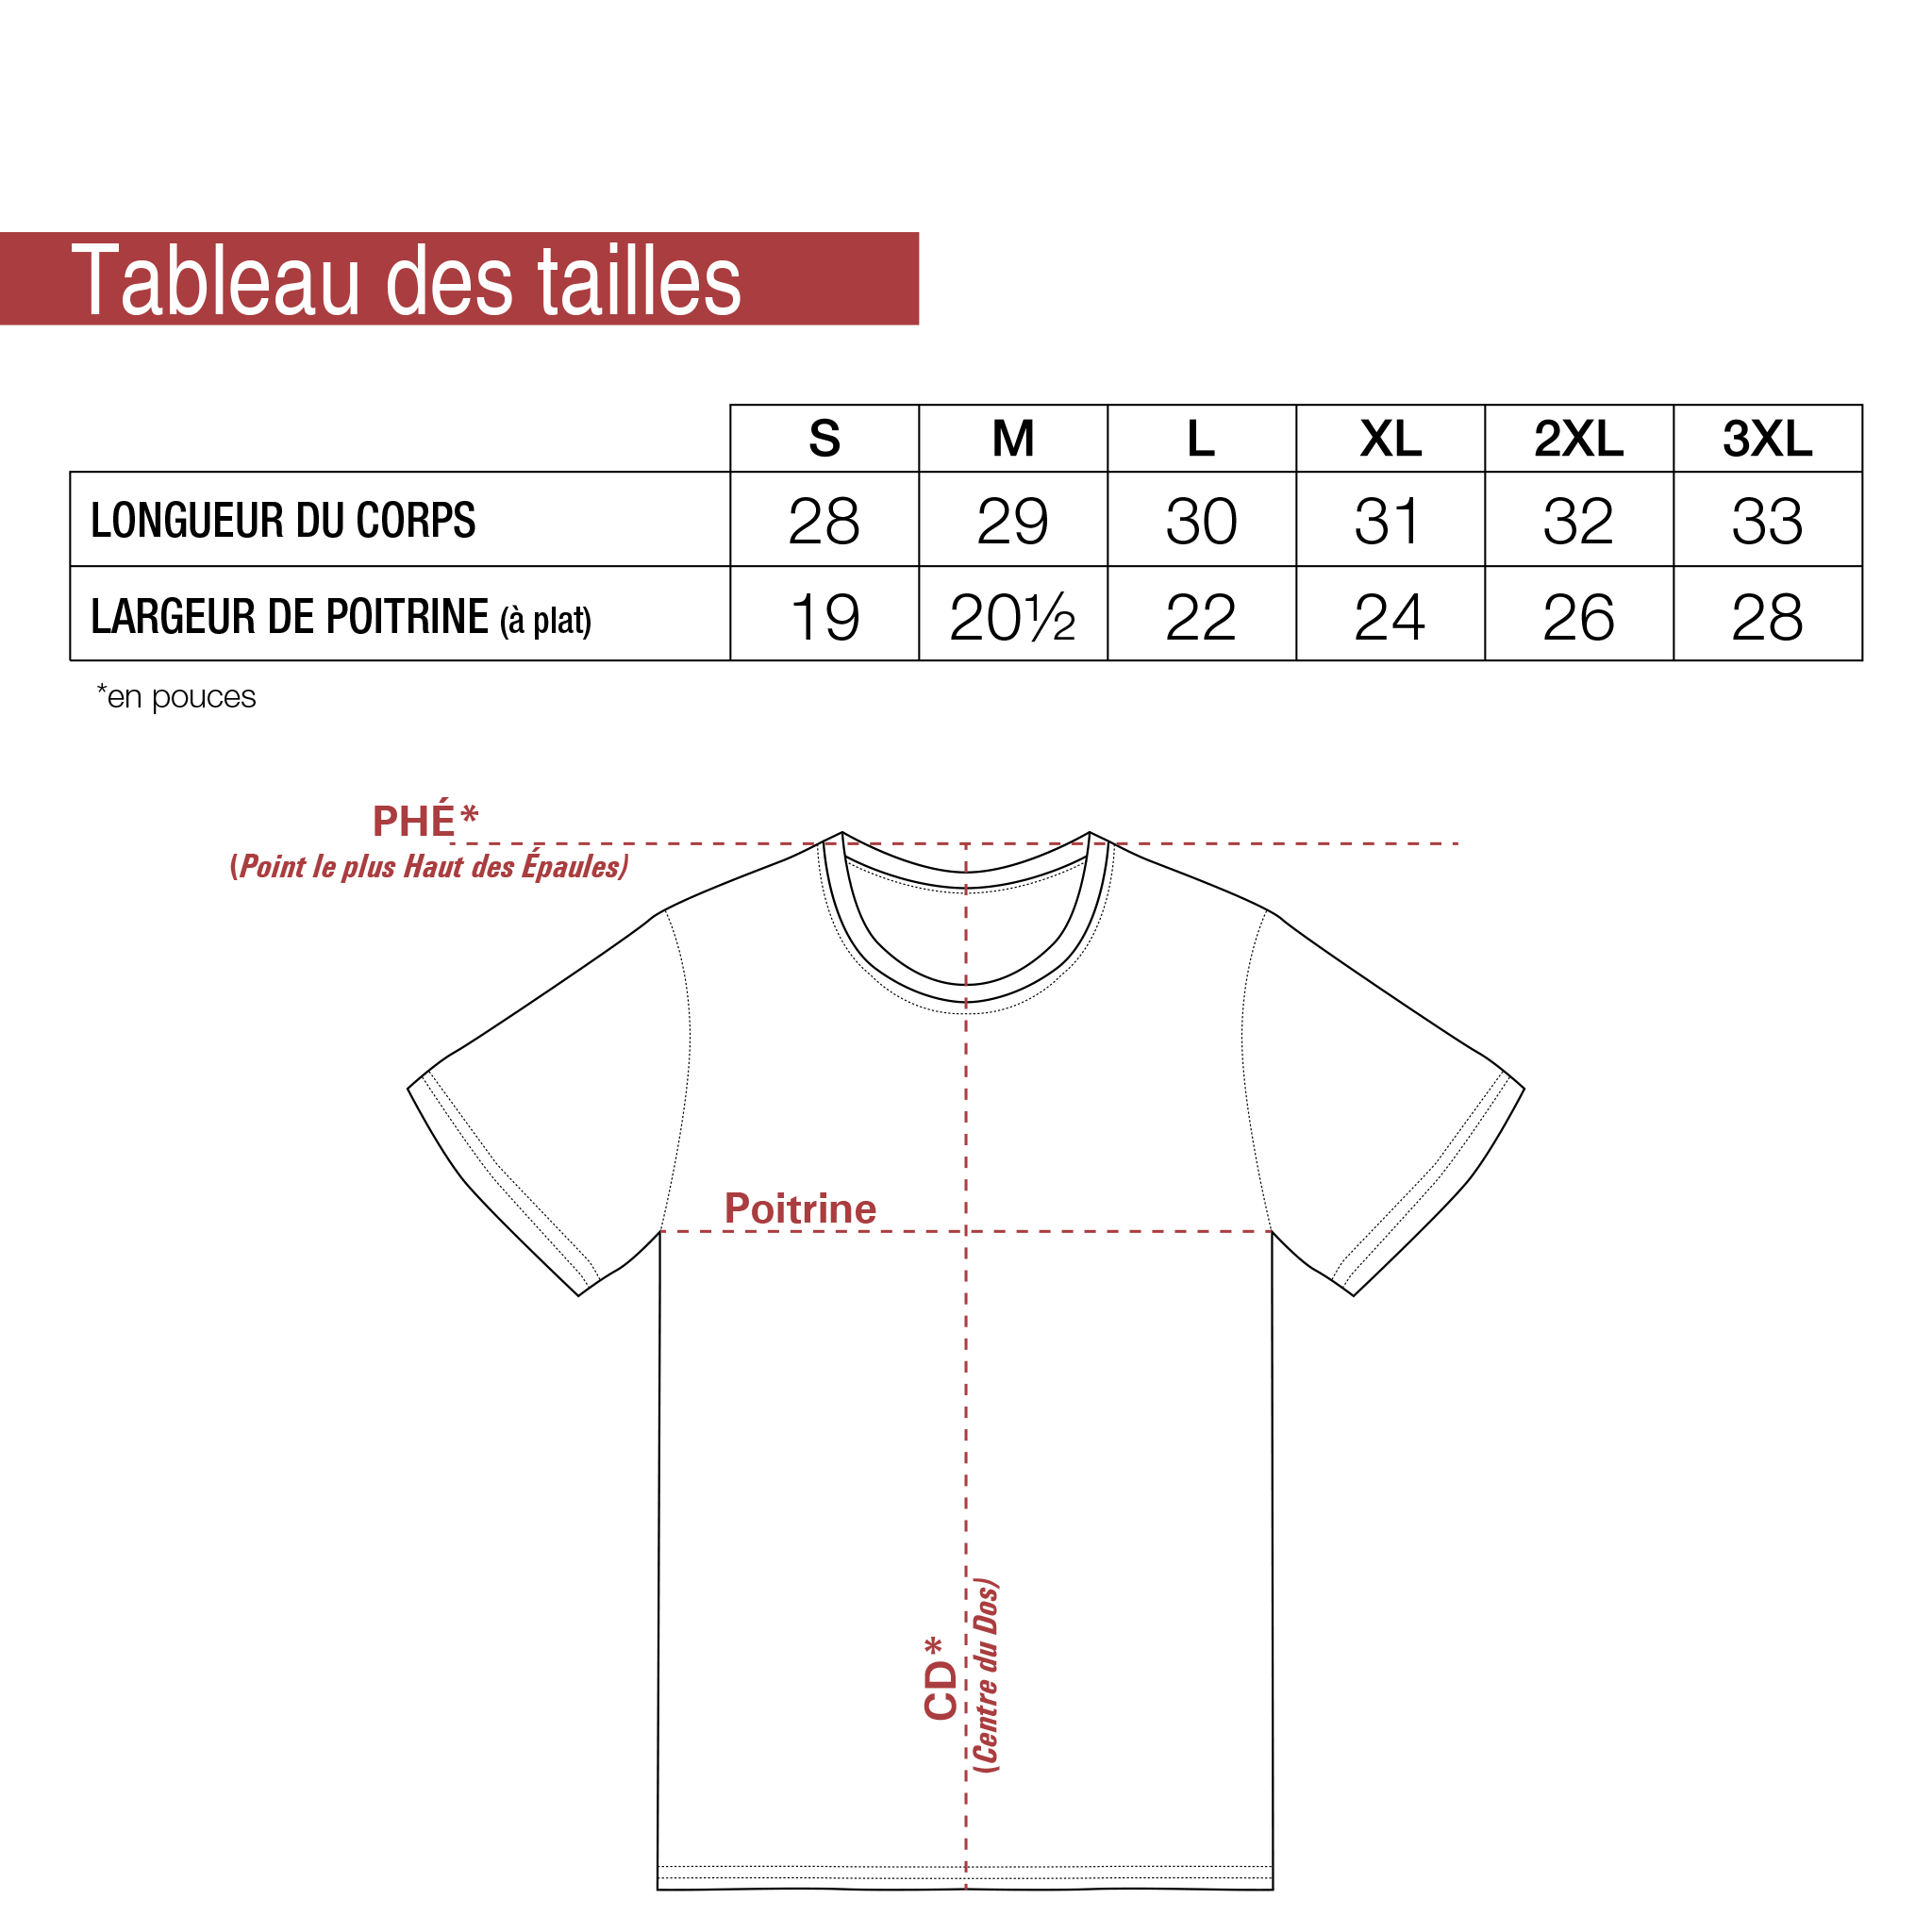 Tableau-taille-N6210_f58c2c75-6630-493a-aac0-e003fbd0fa93.png